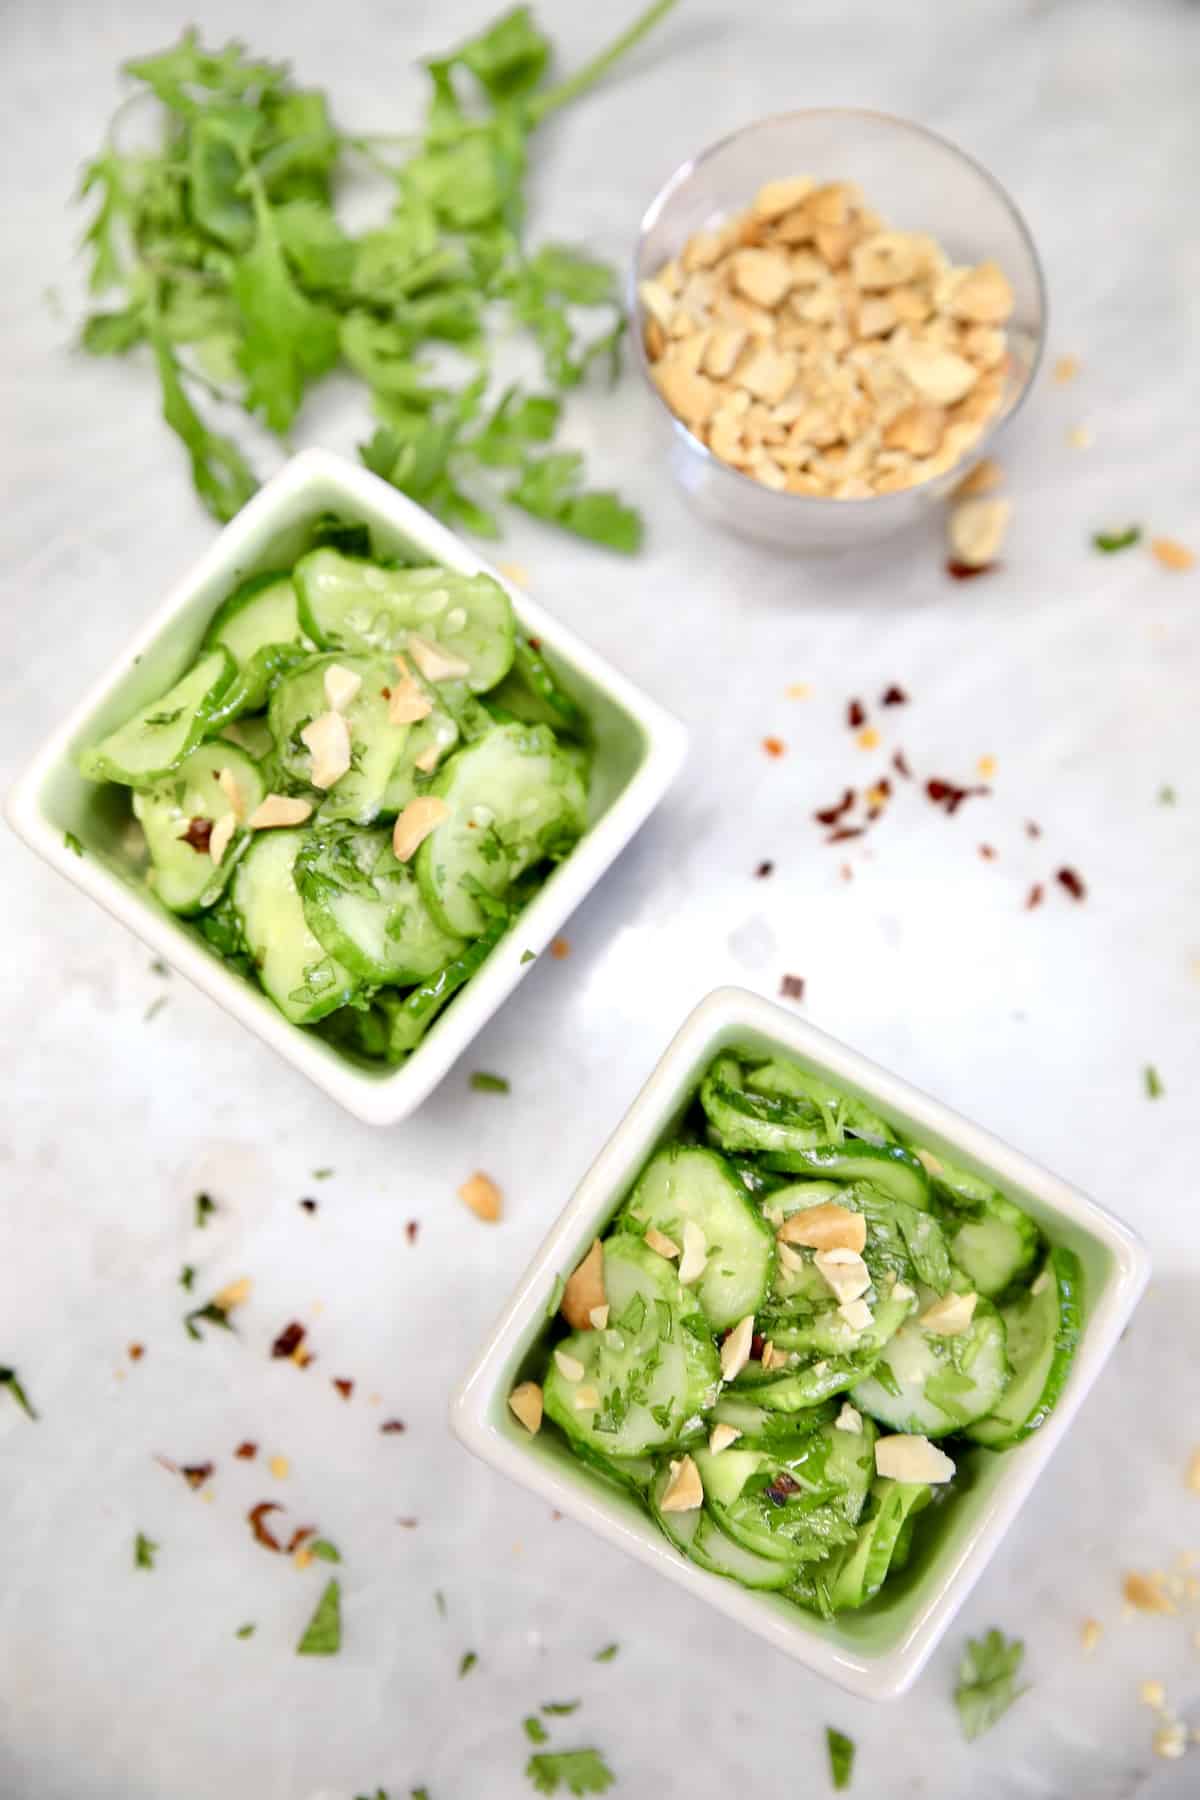 Overhead view of 2 bowls of cucumber salad, small bowl of peanuts.